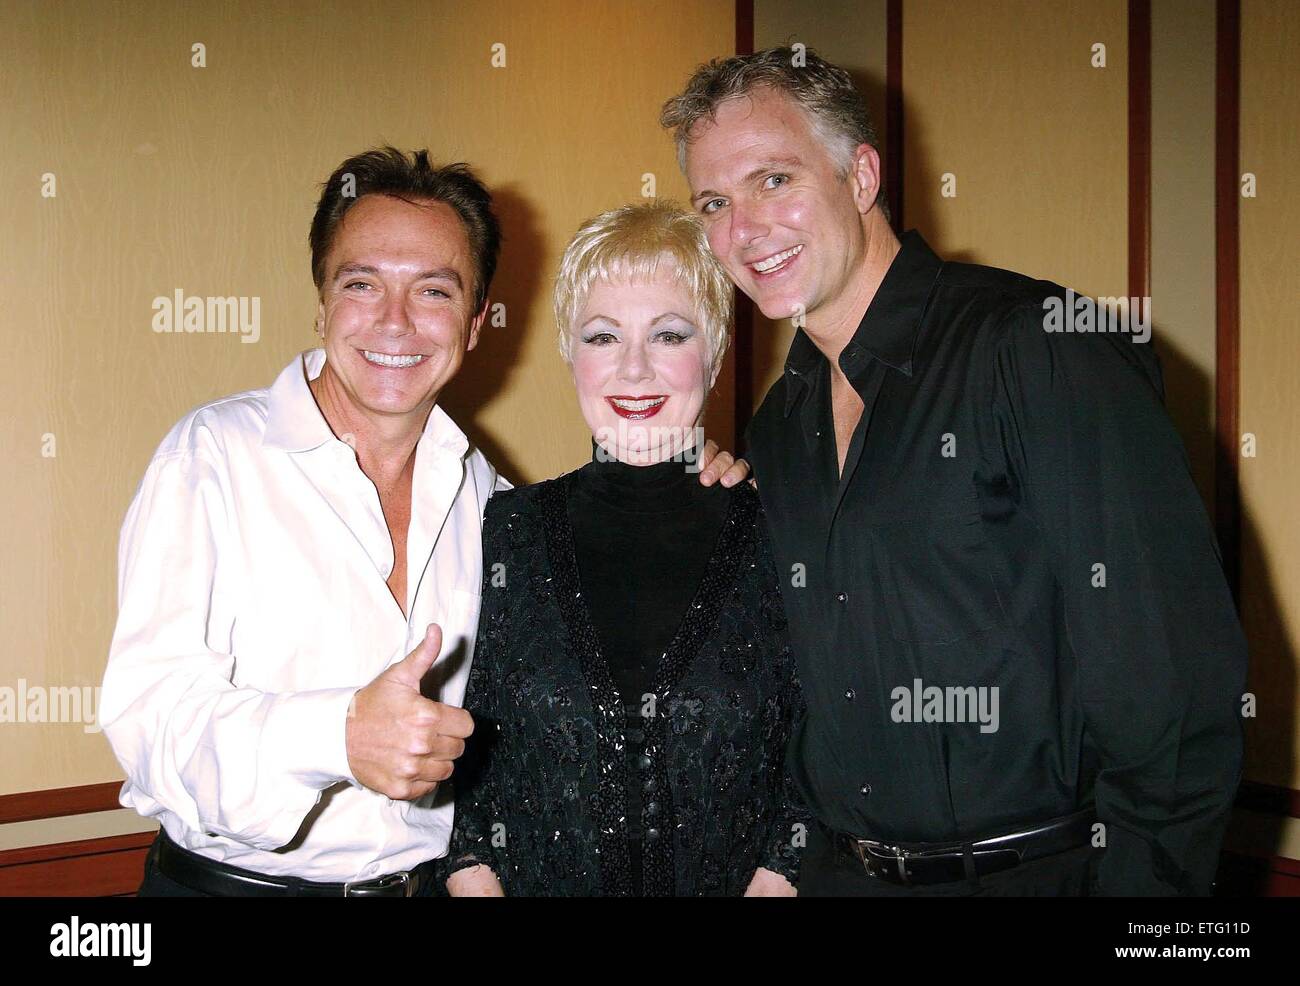 Backstage at the Broadway musical 42nd Street, held at the Ford Center.  Featuring: David Cassidy, Shirley Jones, Patrick Cassidy Where: New York, New York, United States When: 17 May 2004 Credit: Joseph Marzullo/WENN.com Stock Photo